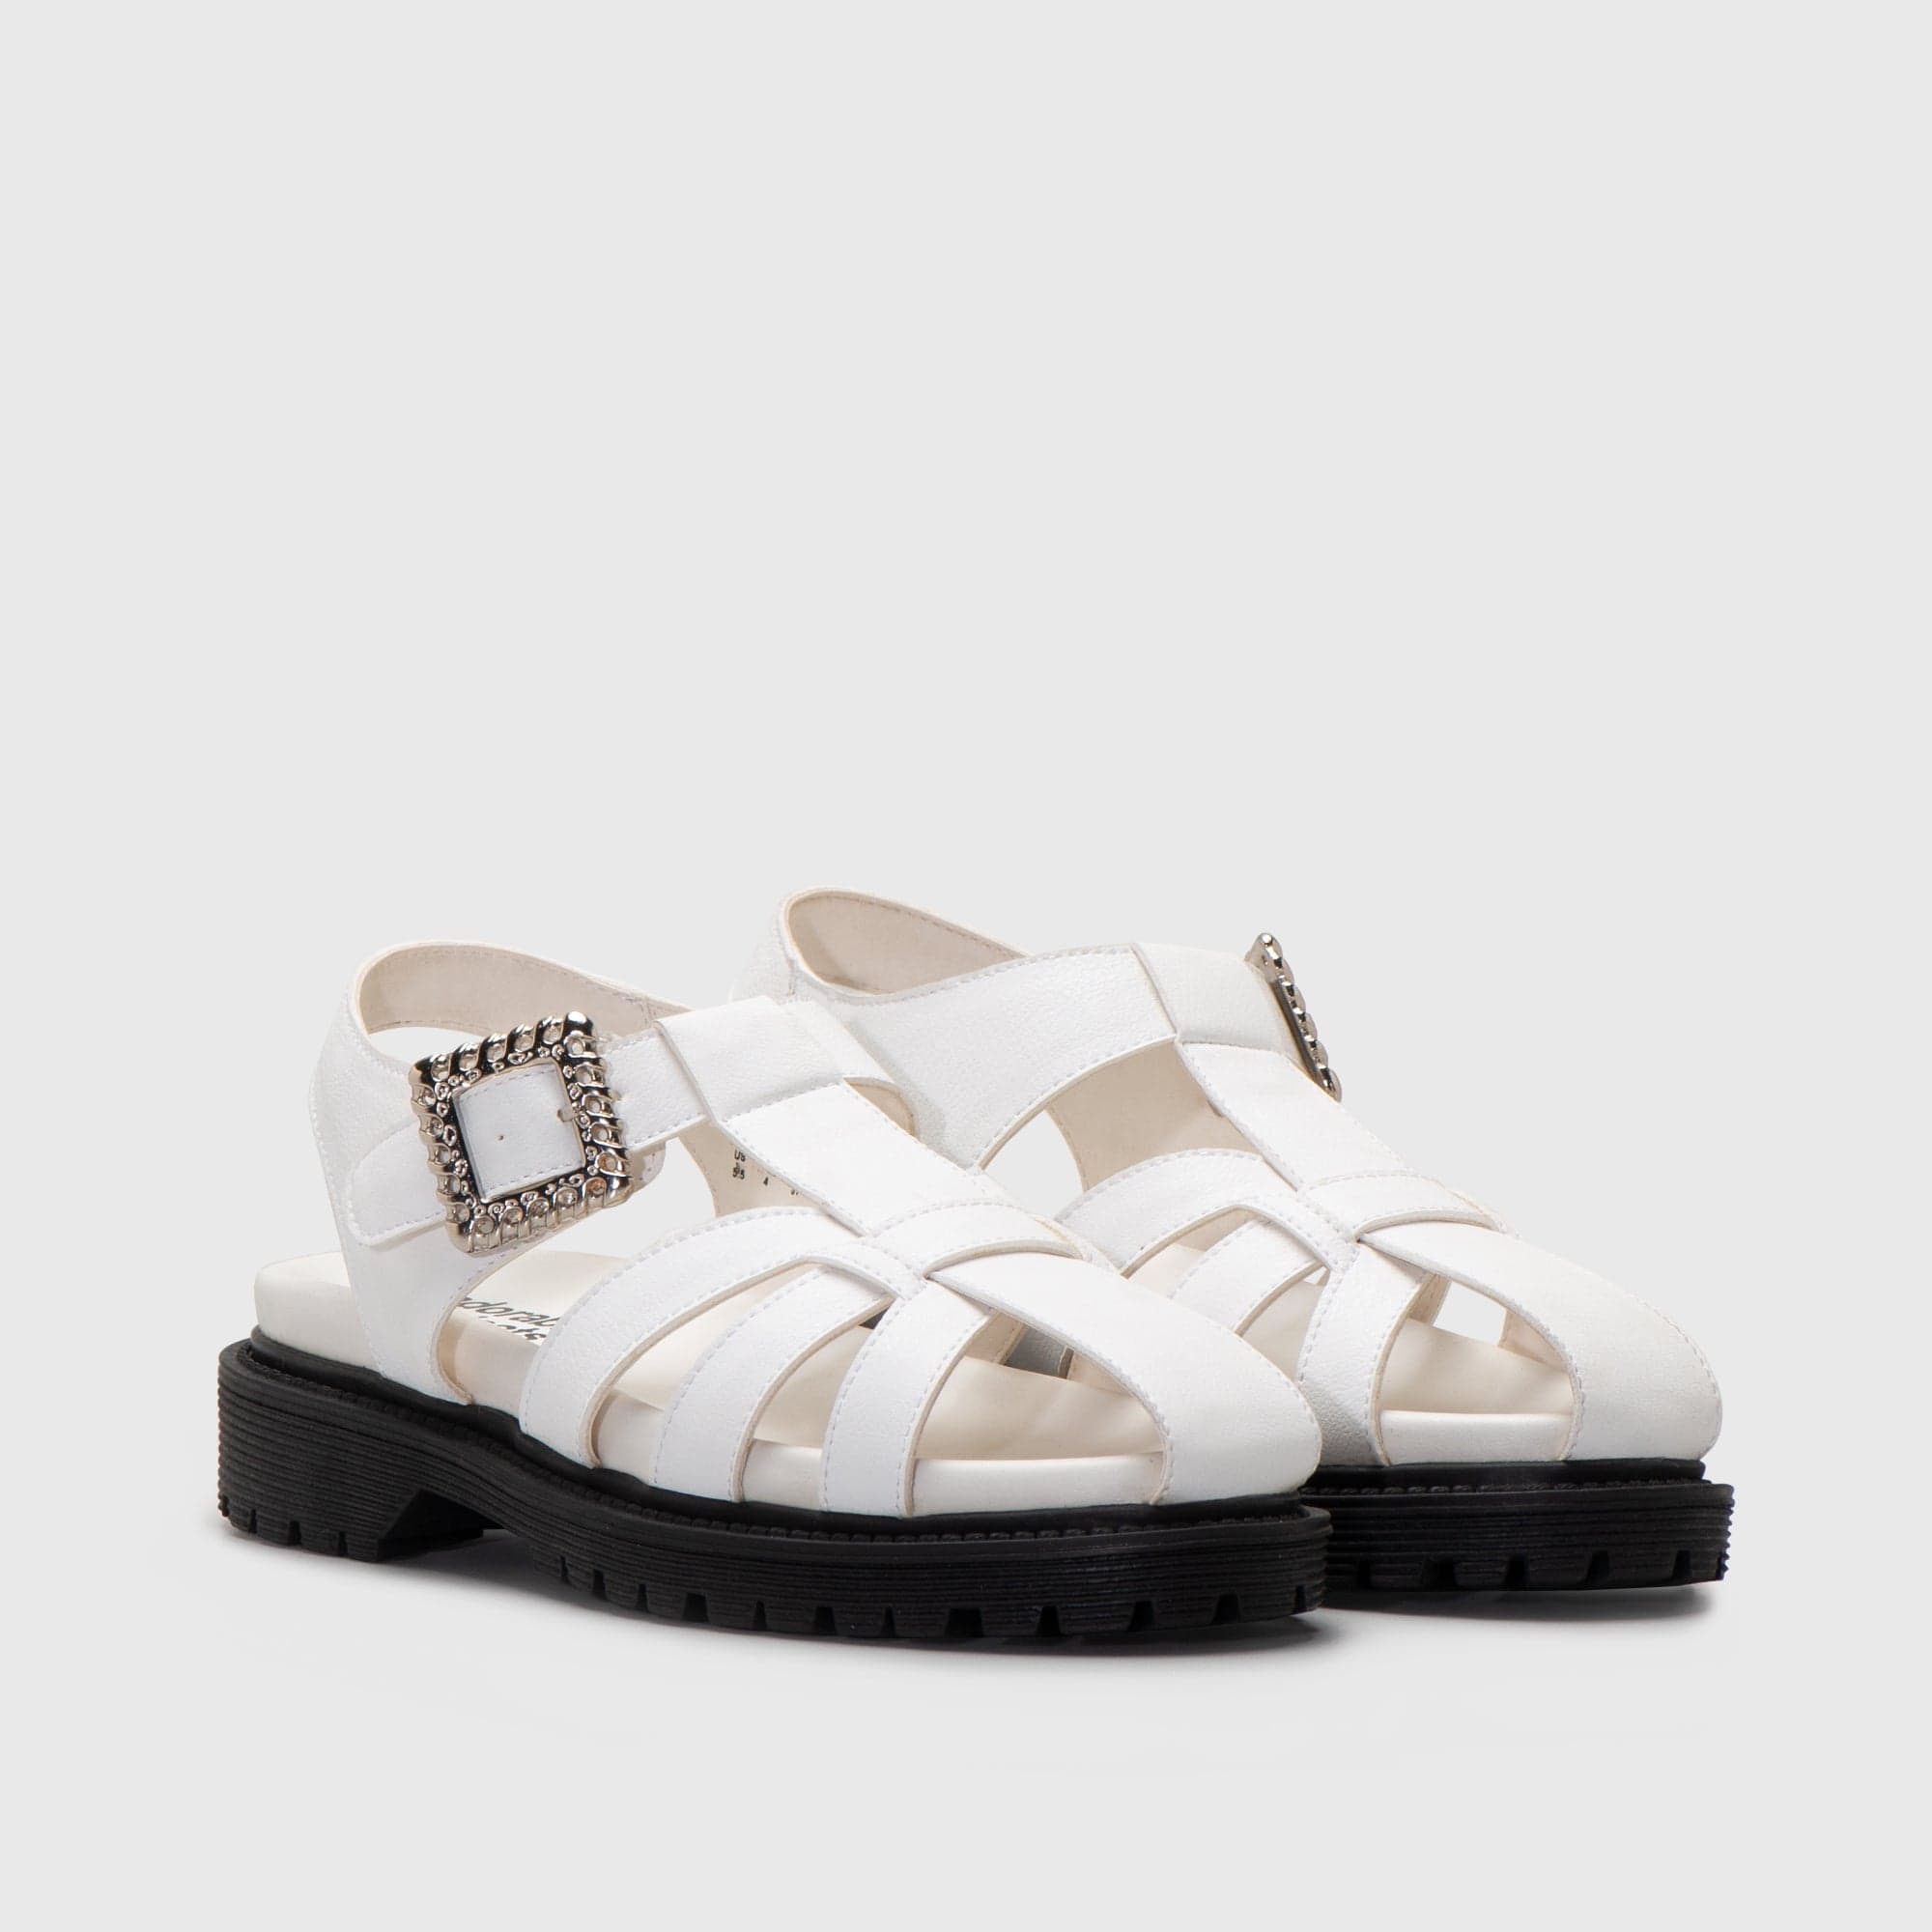 Adorable Projects Official Sandals 43 / White Hanza Sandals White